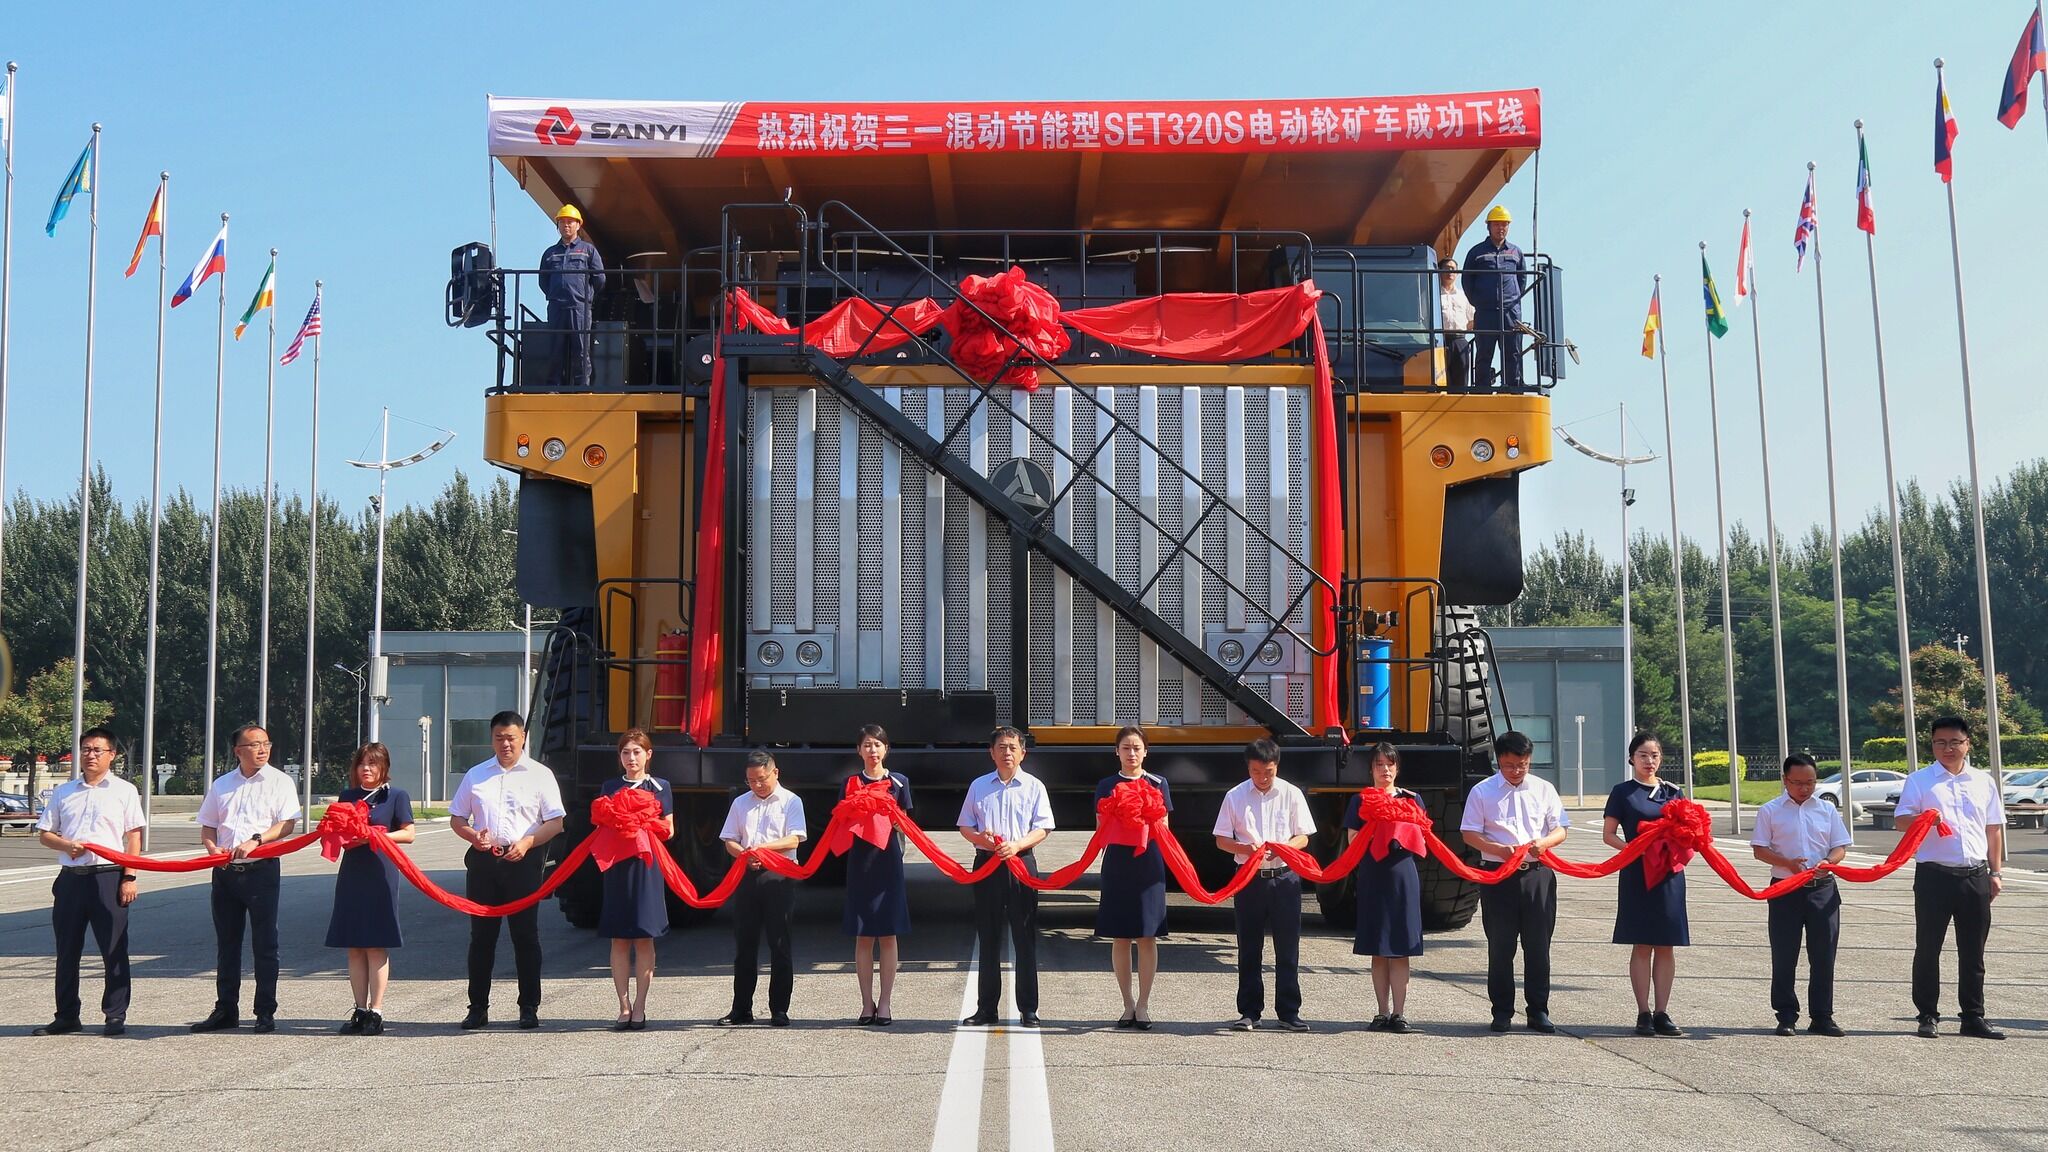 SANY unveils the new mining truck SET320S!